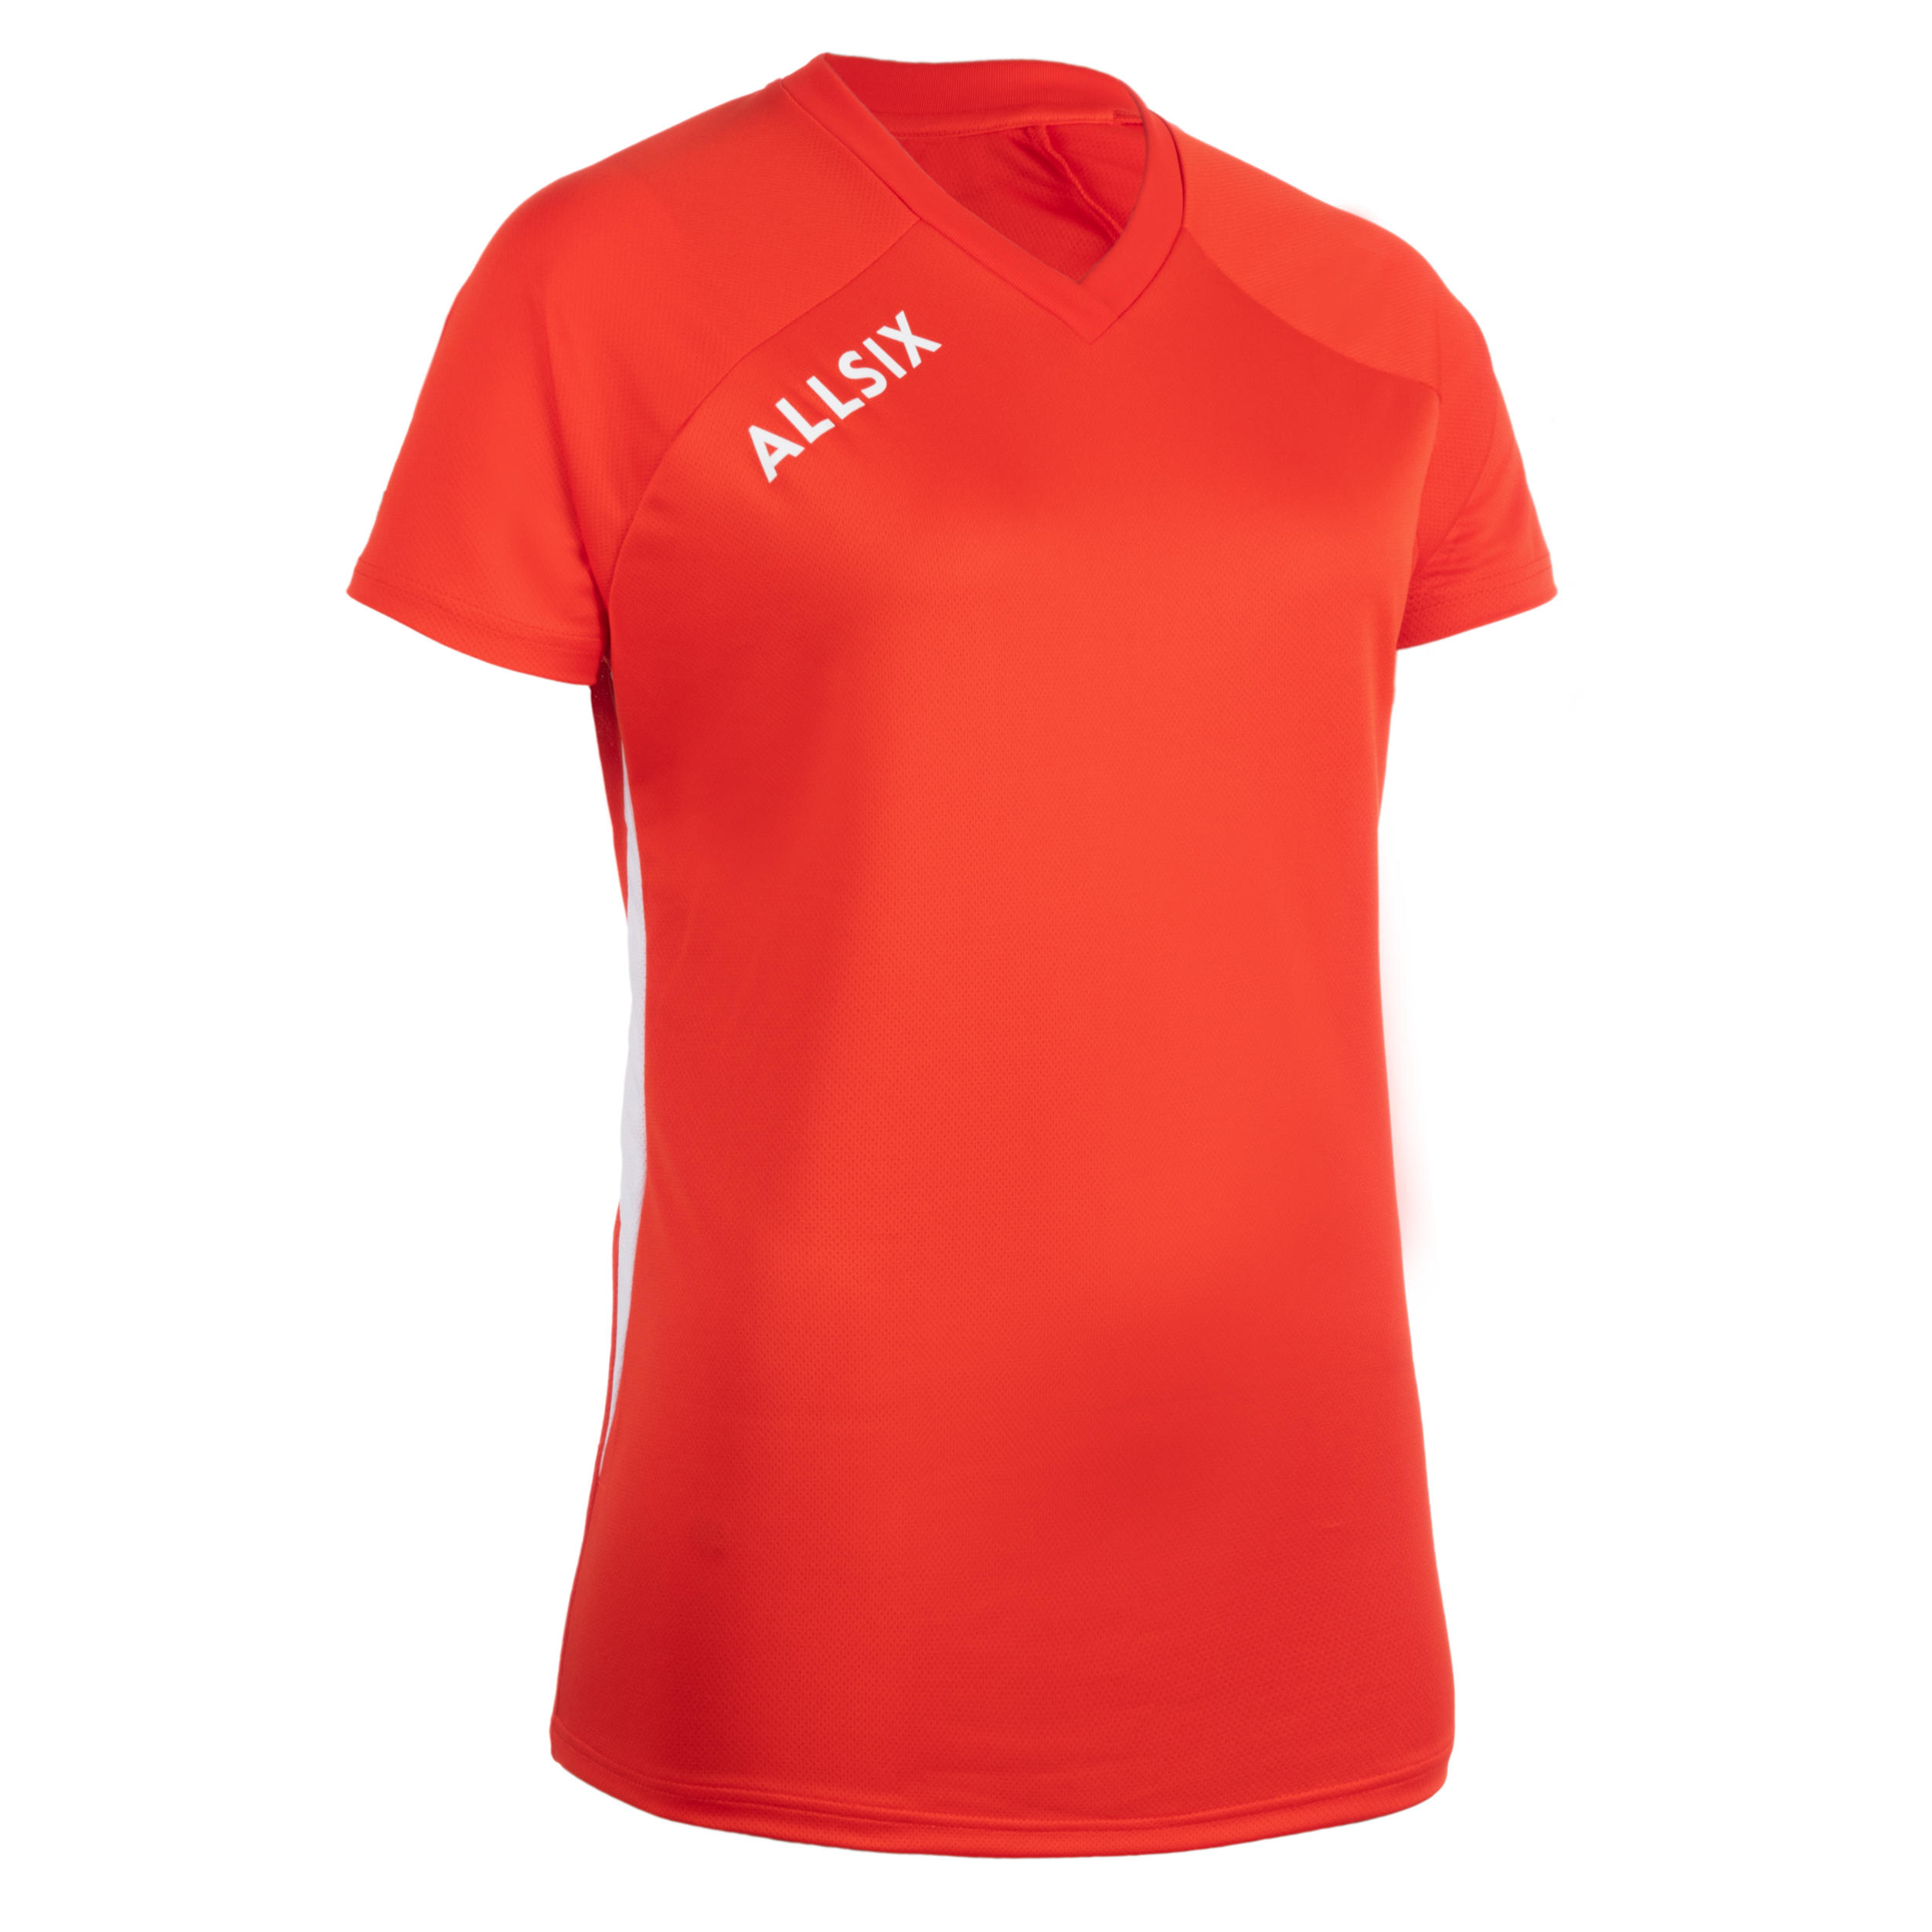 V100 Women's Volleyball Jersey - Red 1/8